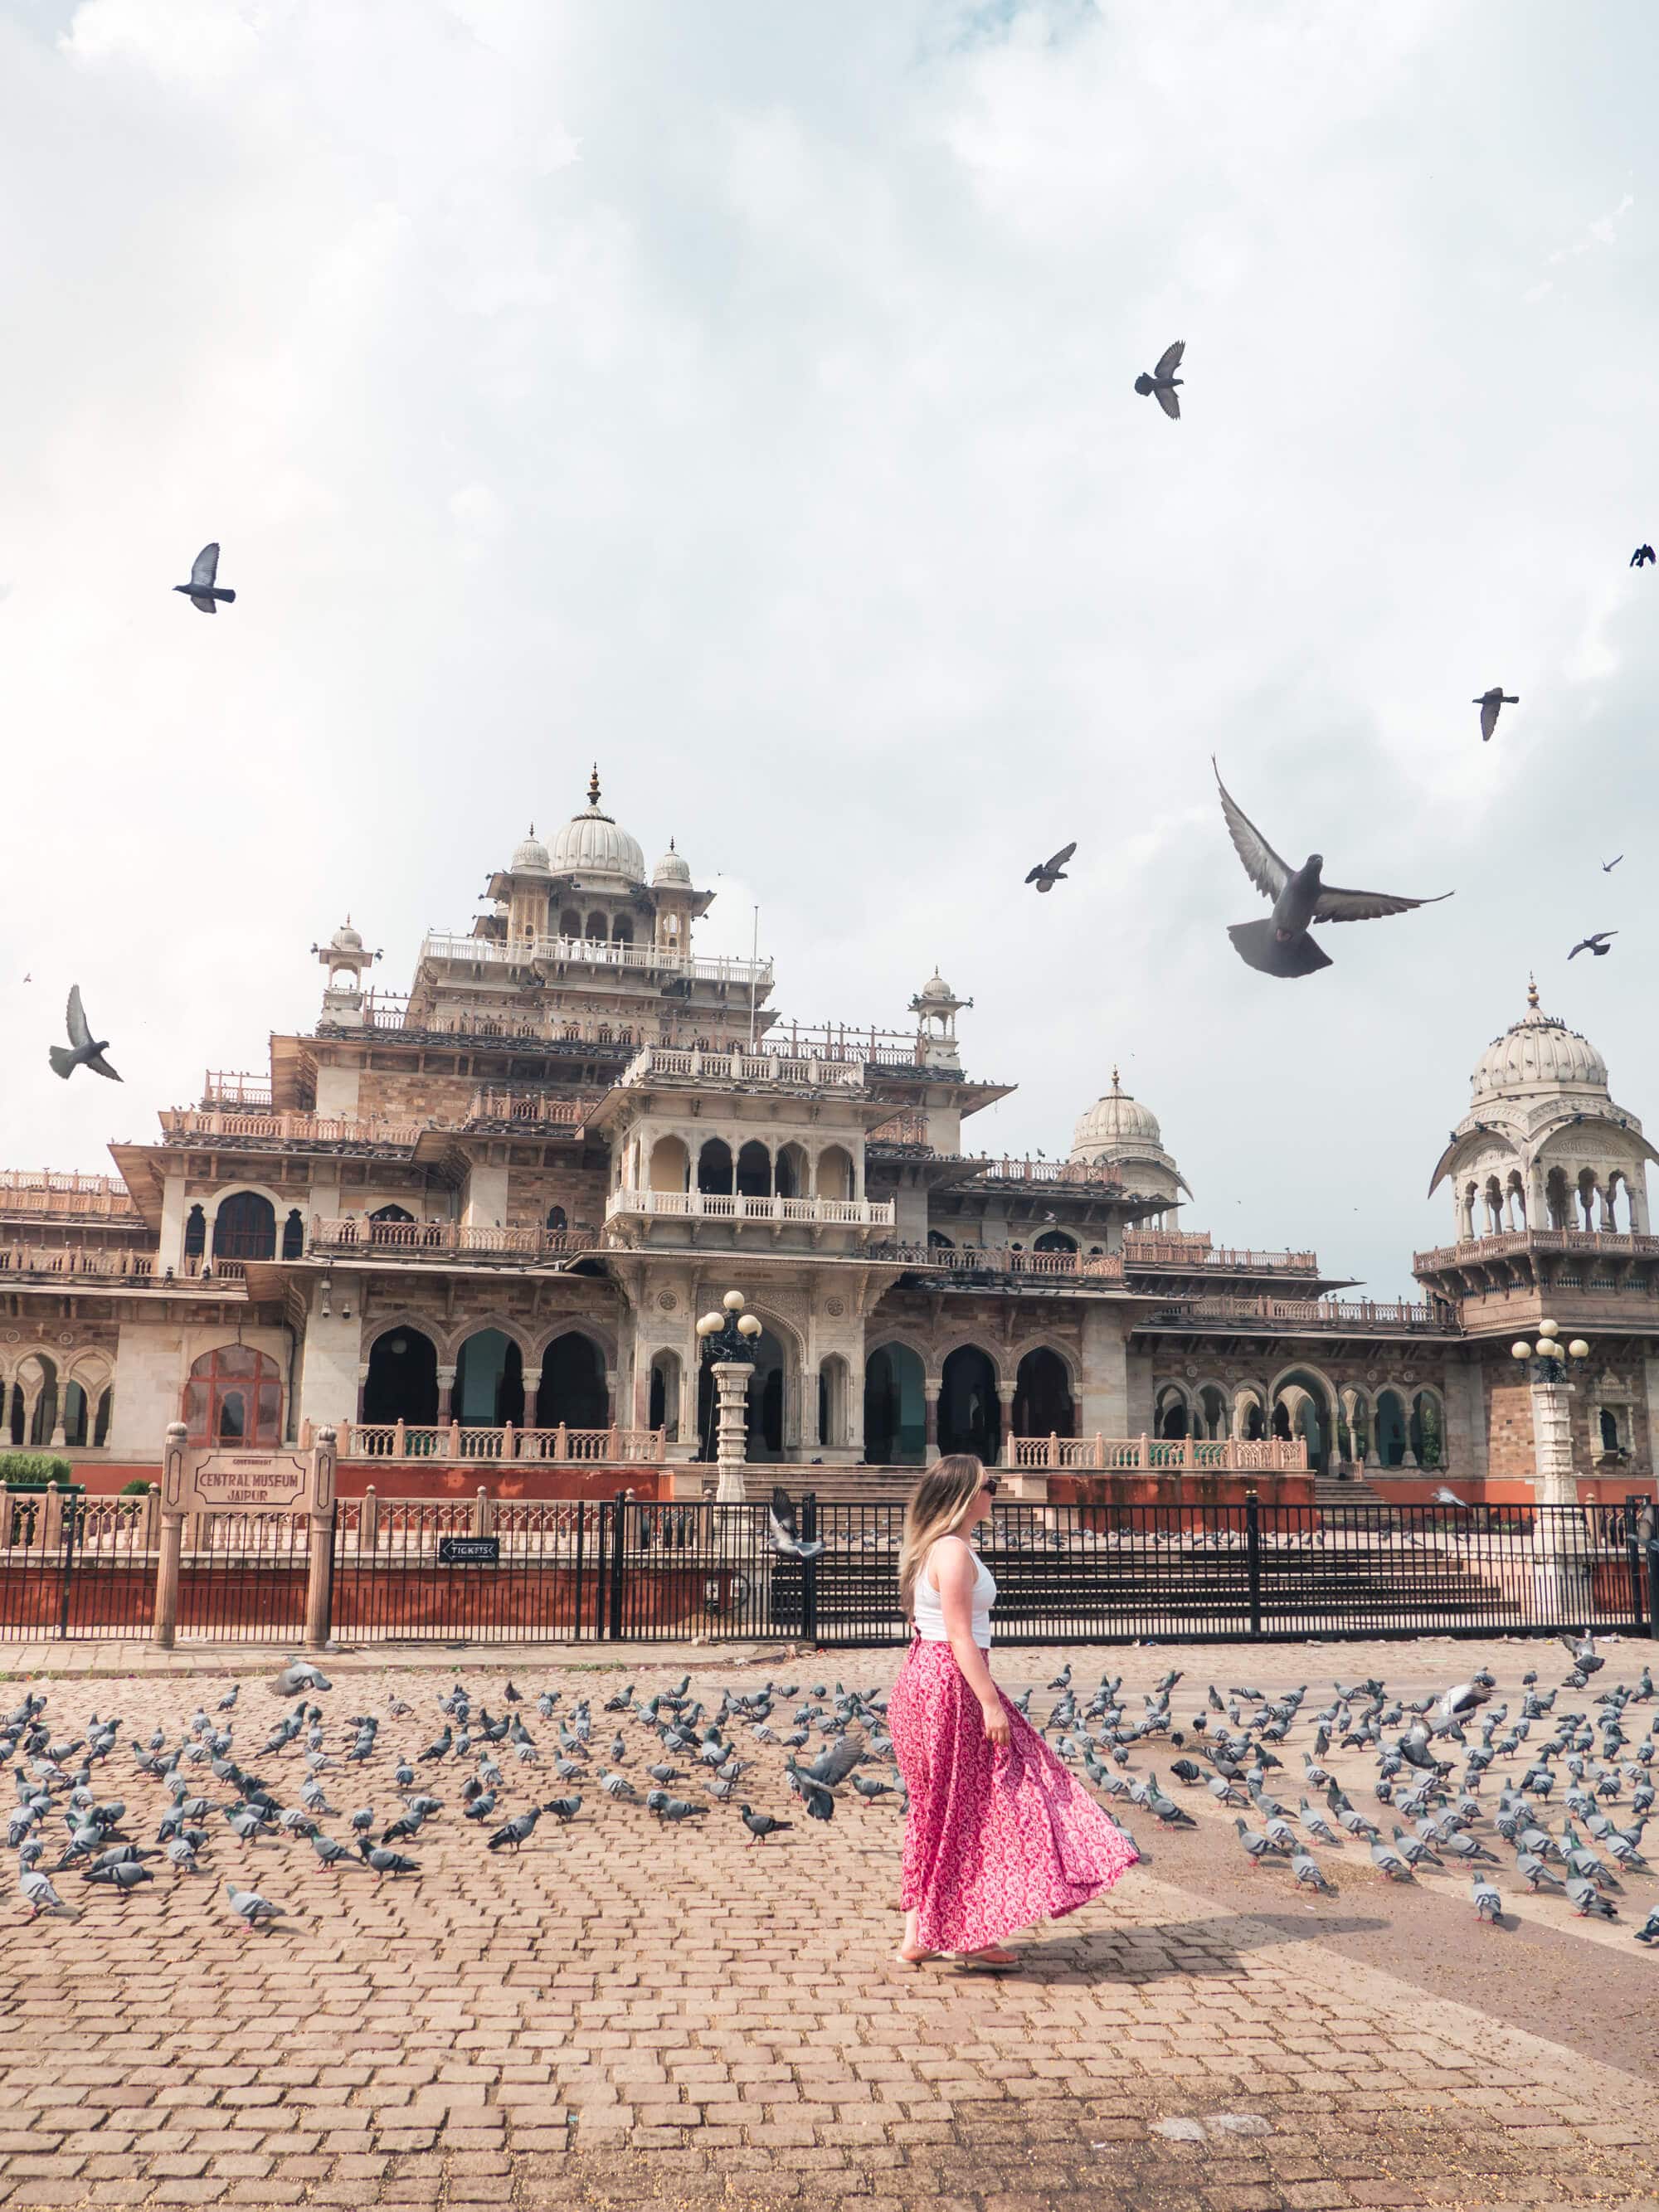 How to spend 2 days in Jaipur - A sea of pigeons in front of Albert Hall Museum